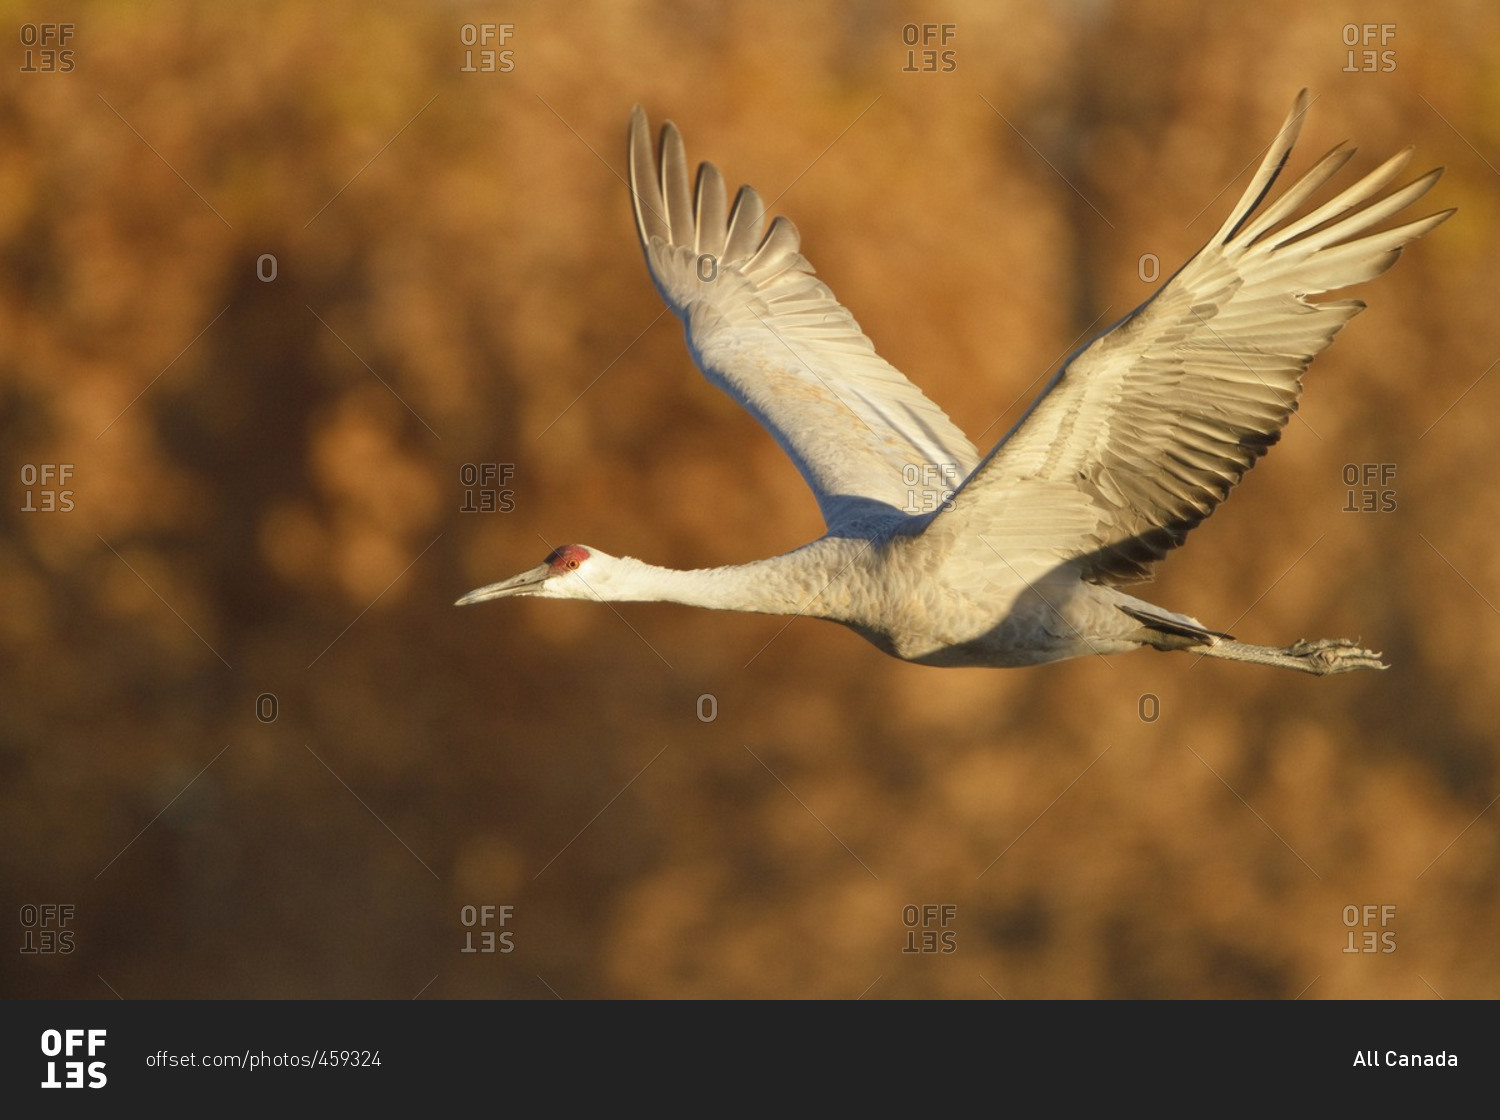 Sand hill Crane (Grus canadensis) flying at the Bosque del Apache wildlife refuge near Socorro, New Mexico, United States of America.